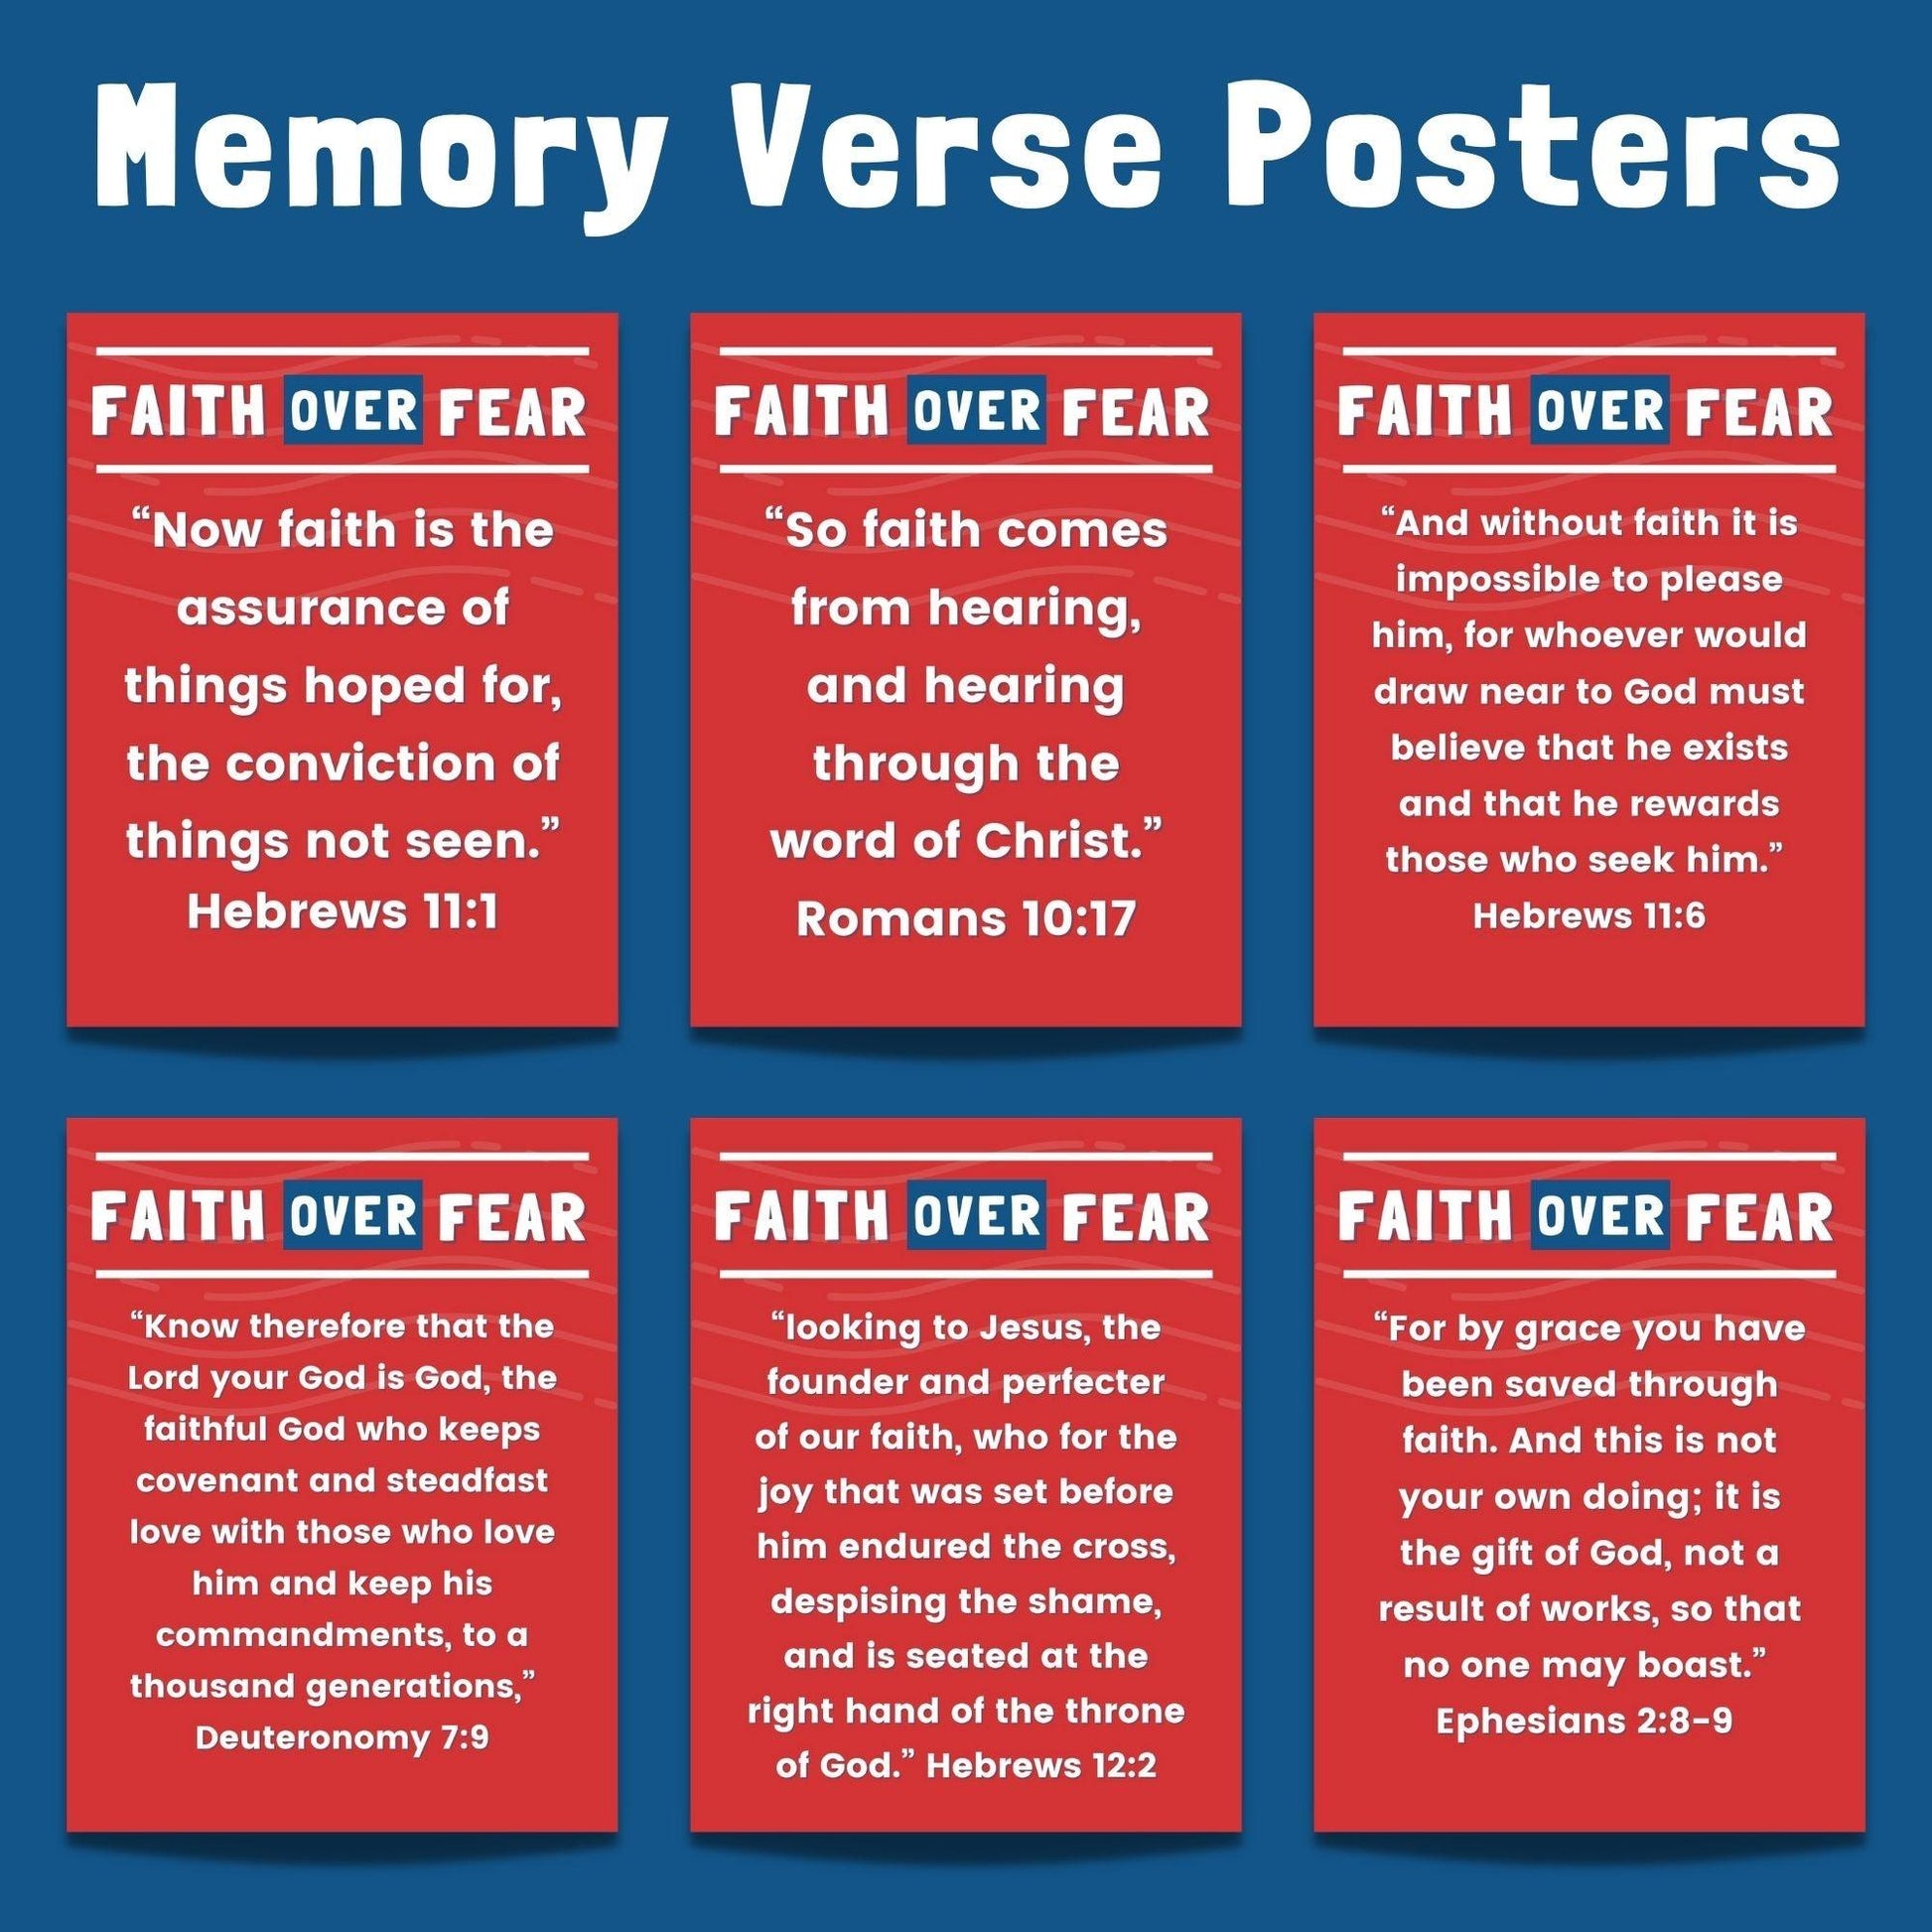 Faith Over Fear: 5-Week Curriculum (download only) - Sunday School Store 